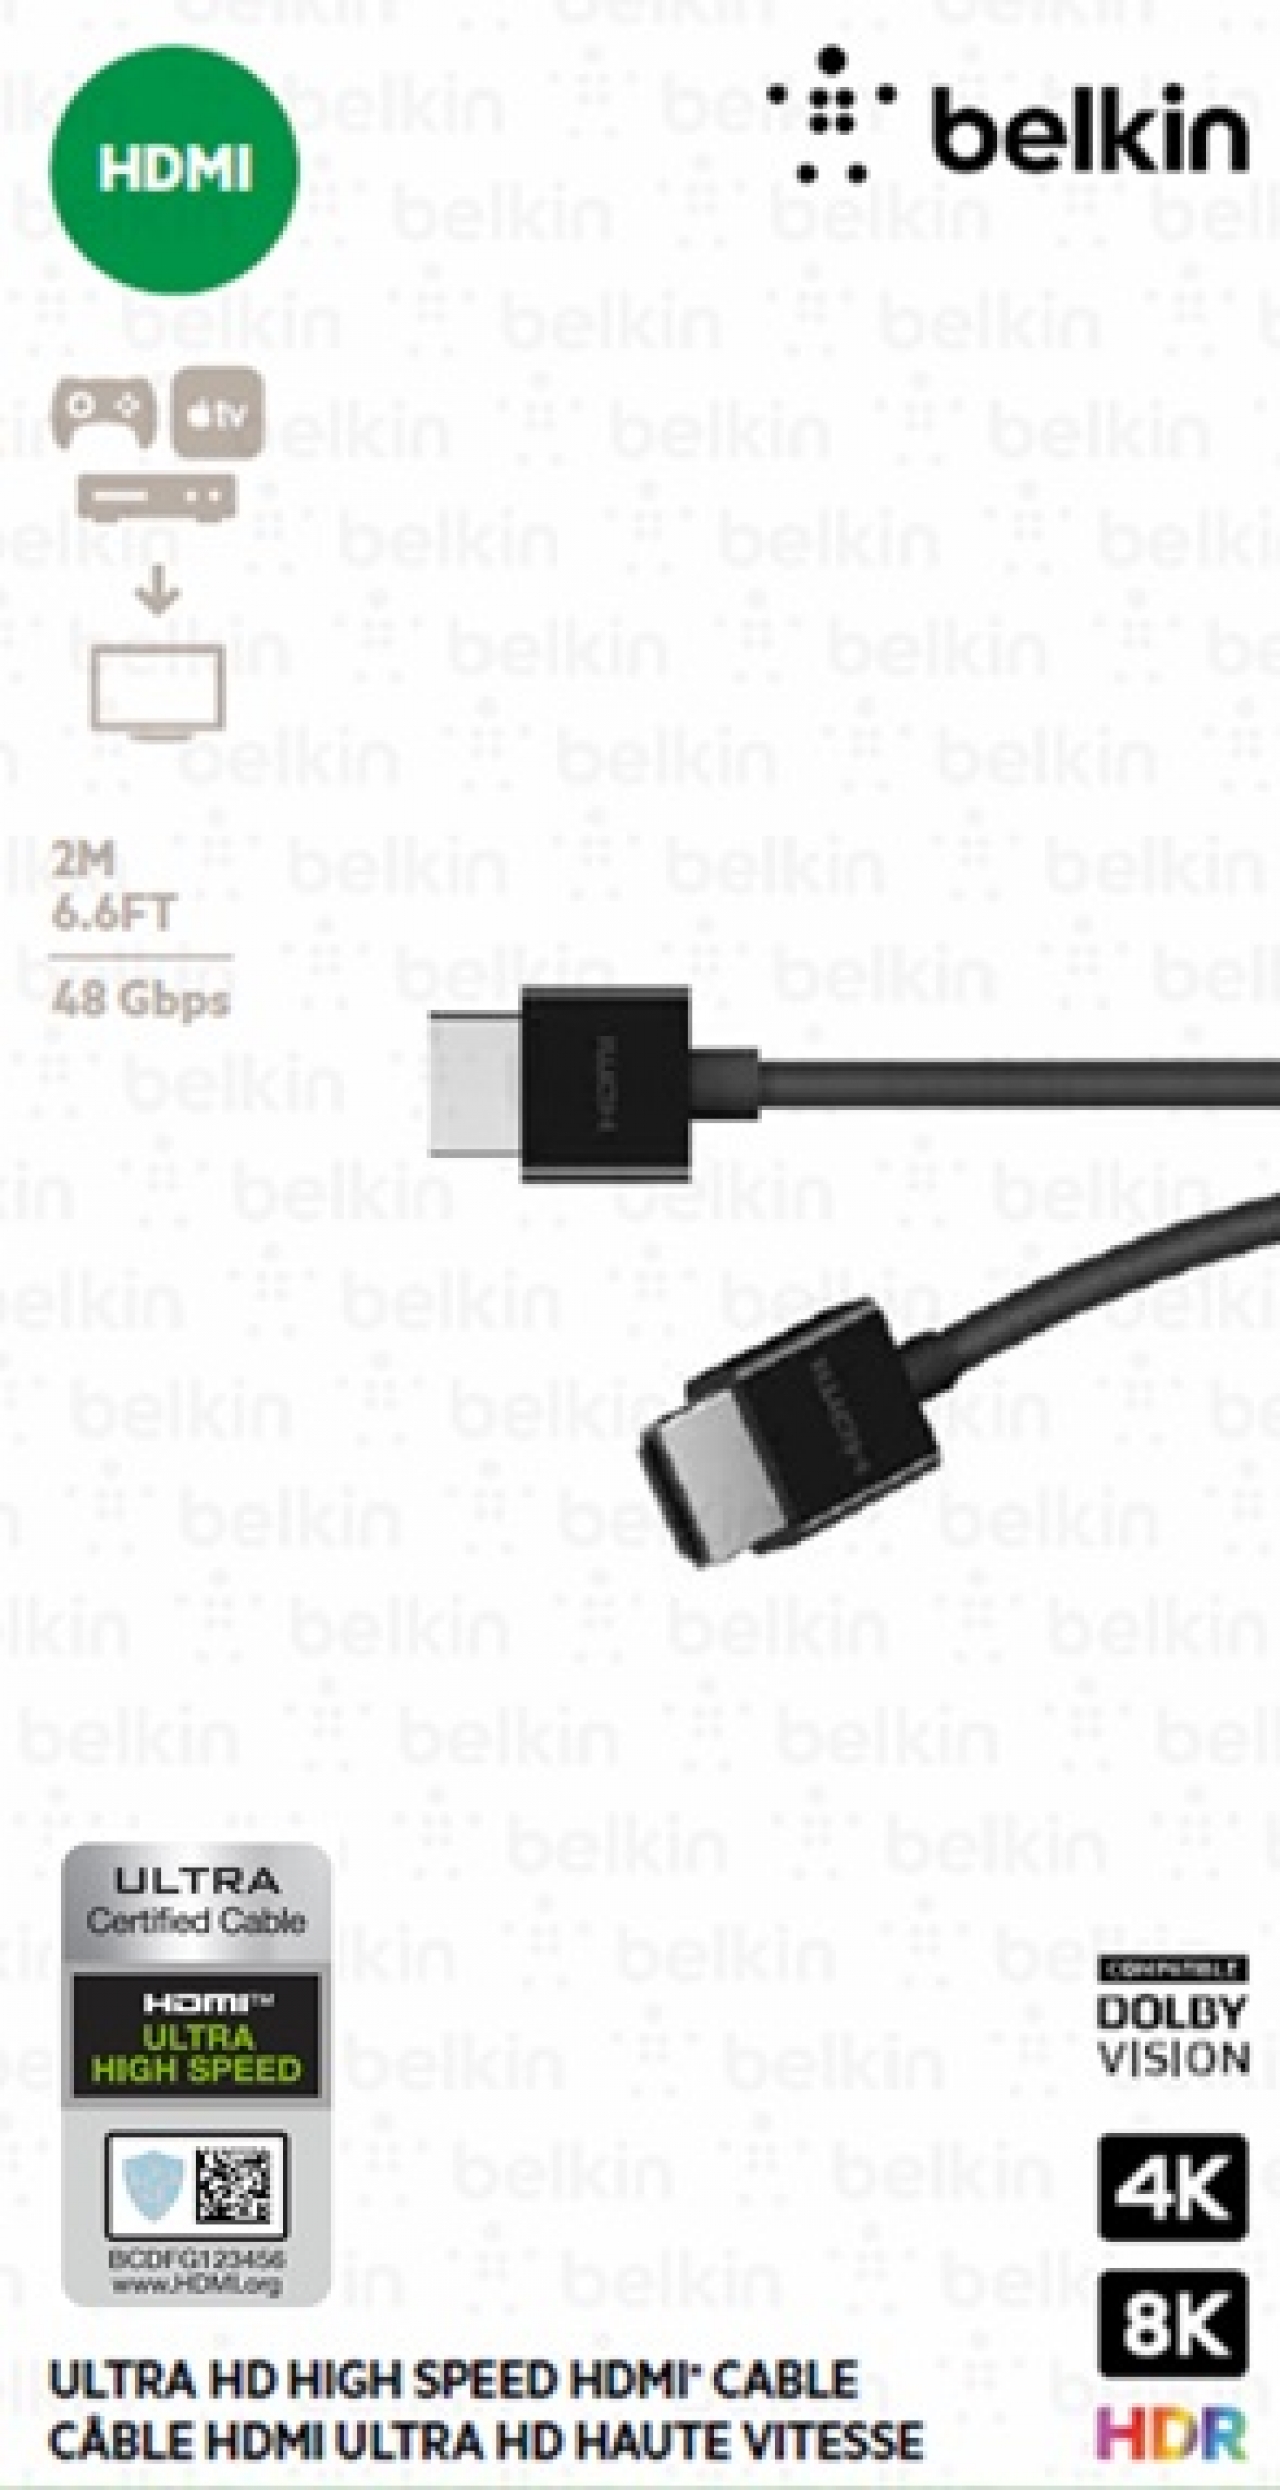 iTWire - Not all HDMI cables are the Belkin range receives 'Ultra High Speed HDMI